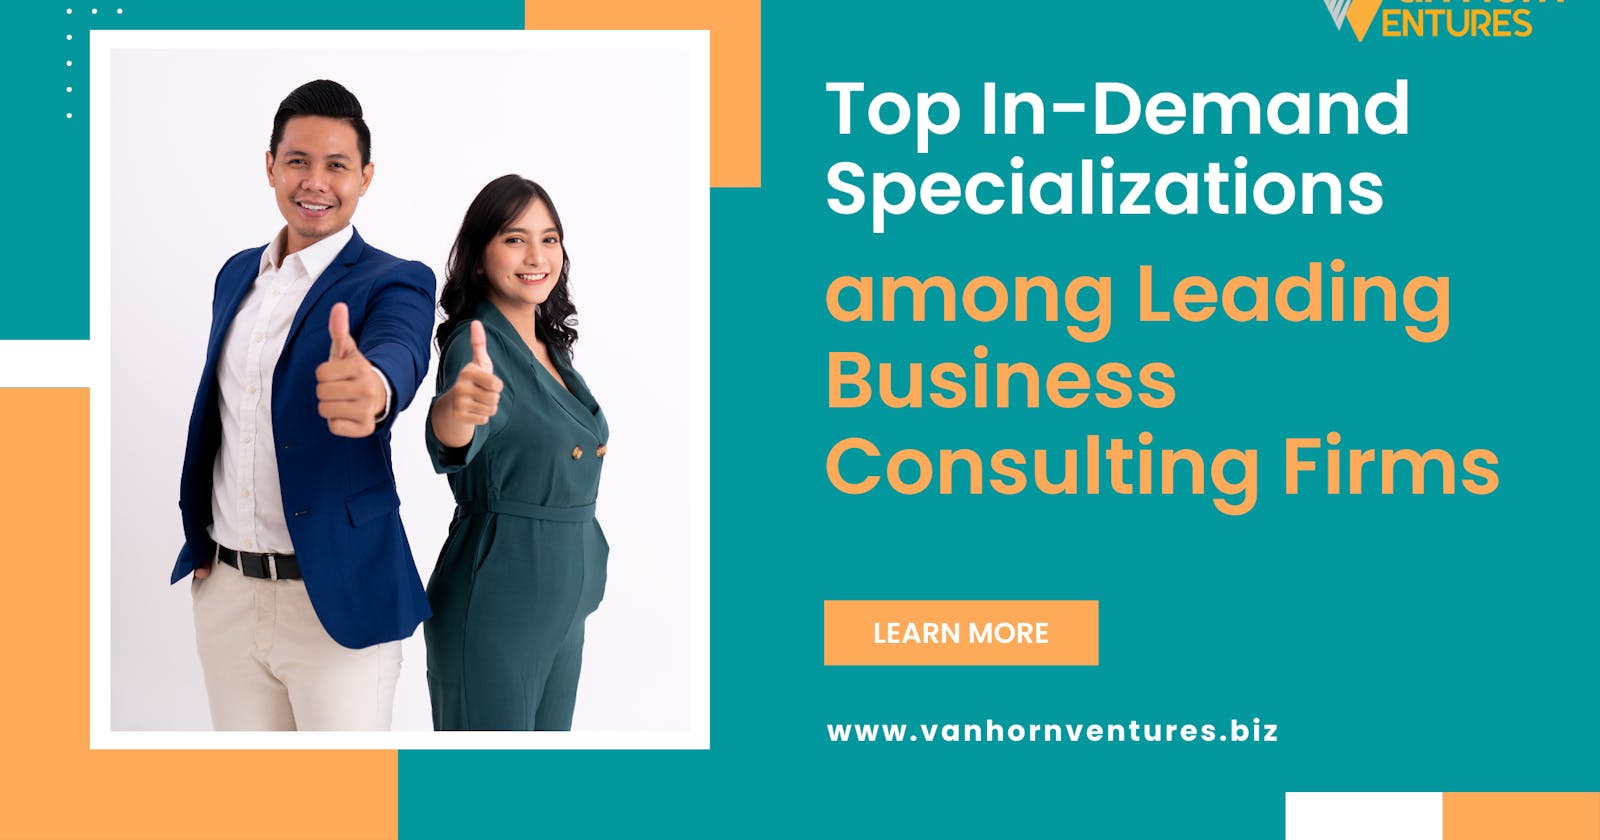 What are the Most In-Demand Specializations Among Top Business Consulting Firms?